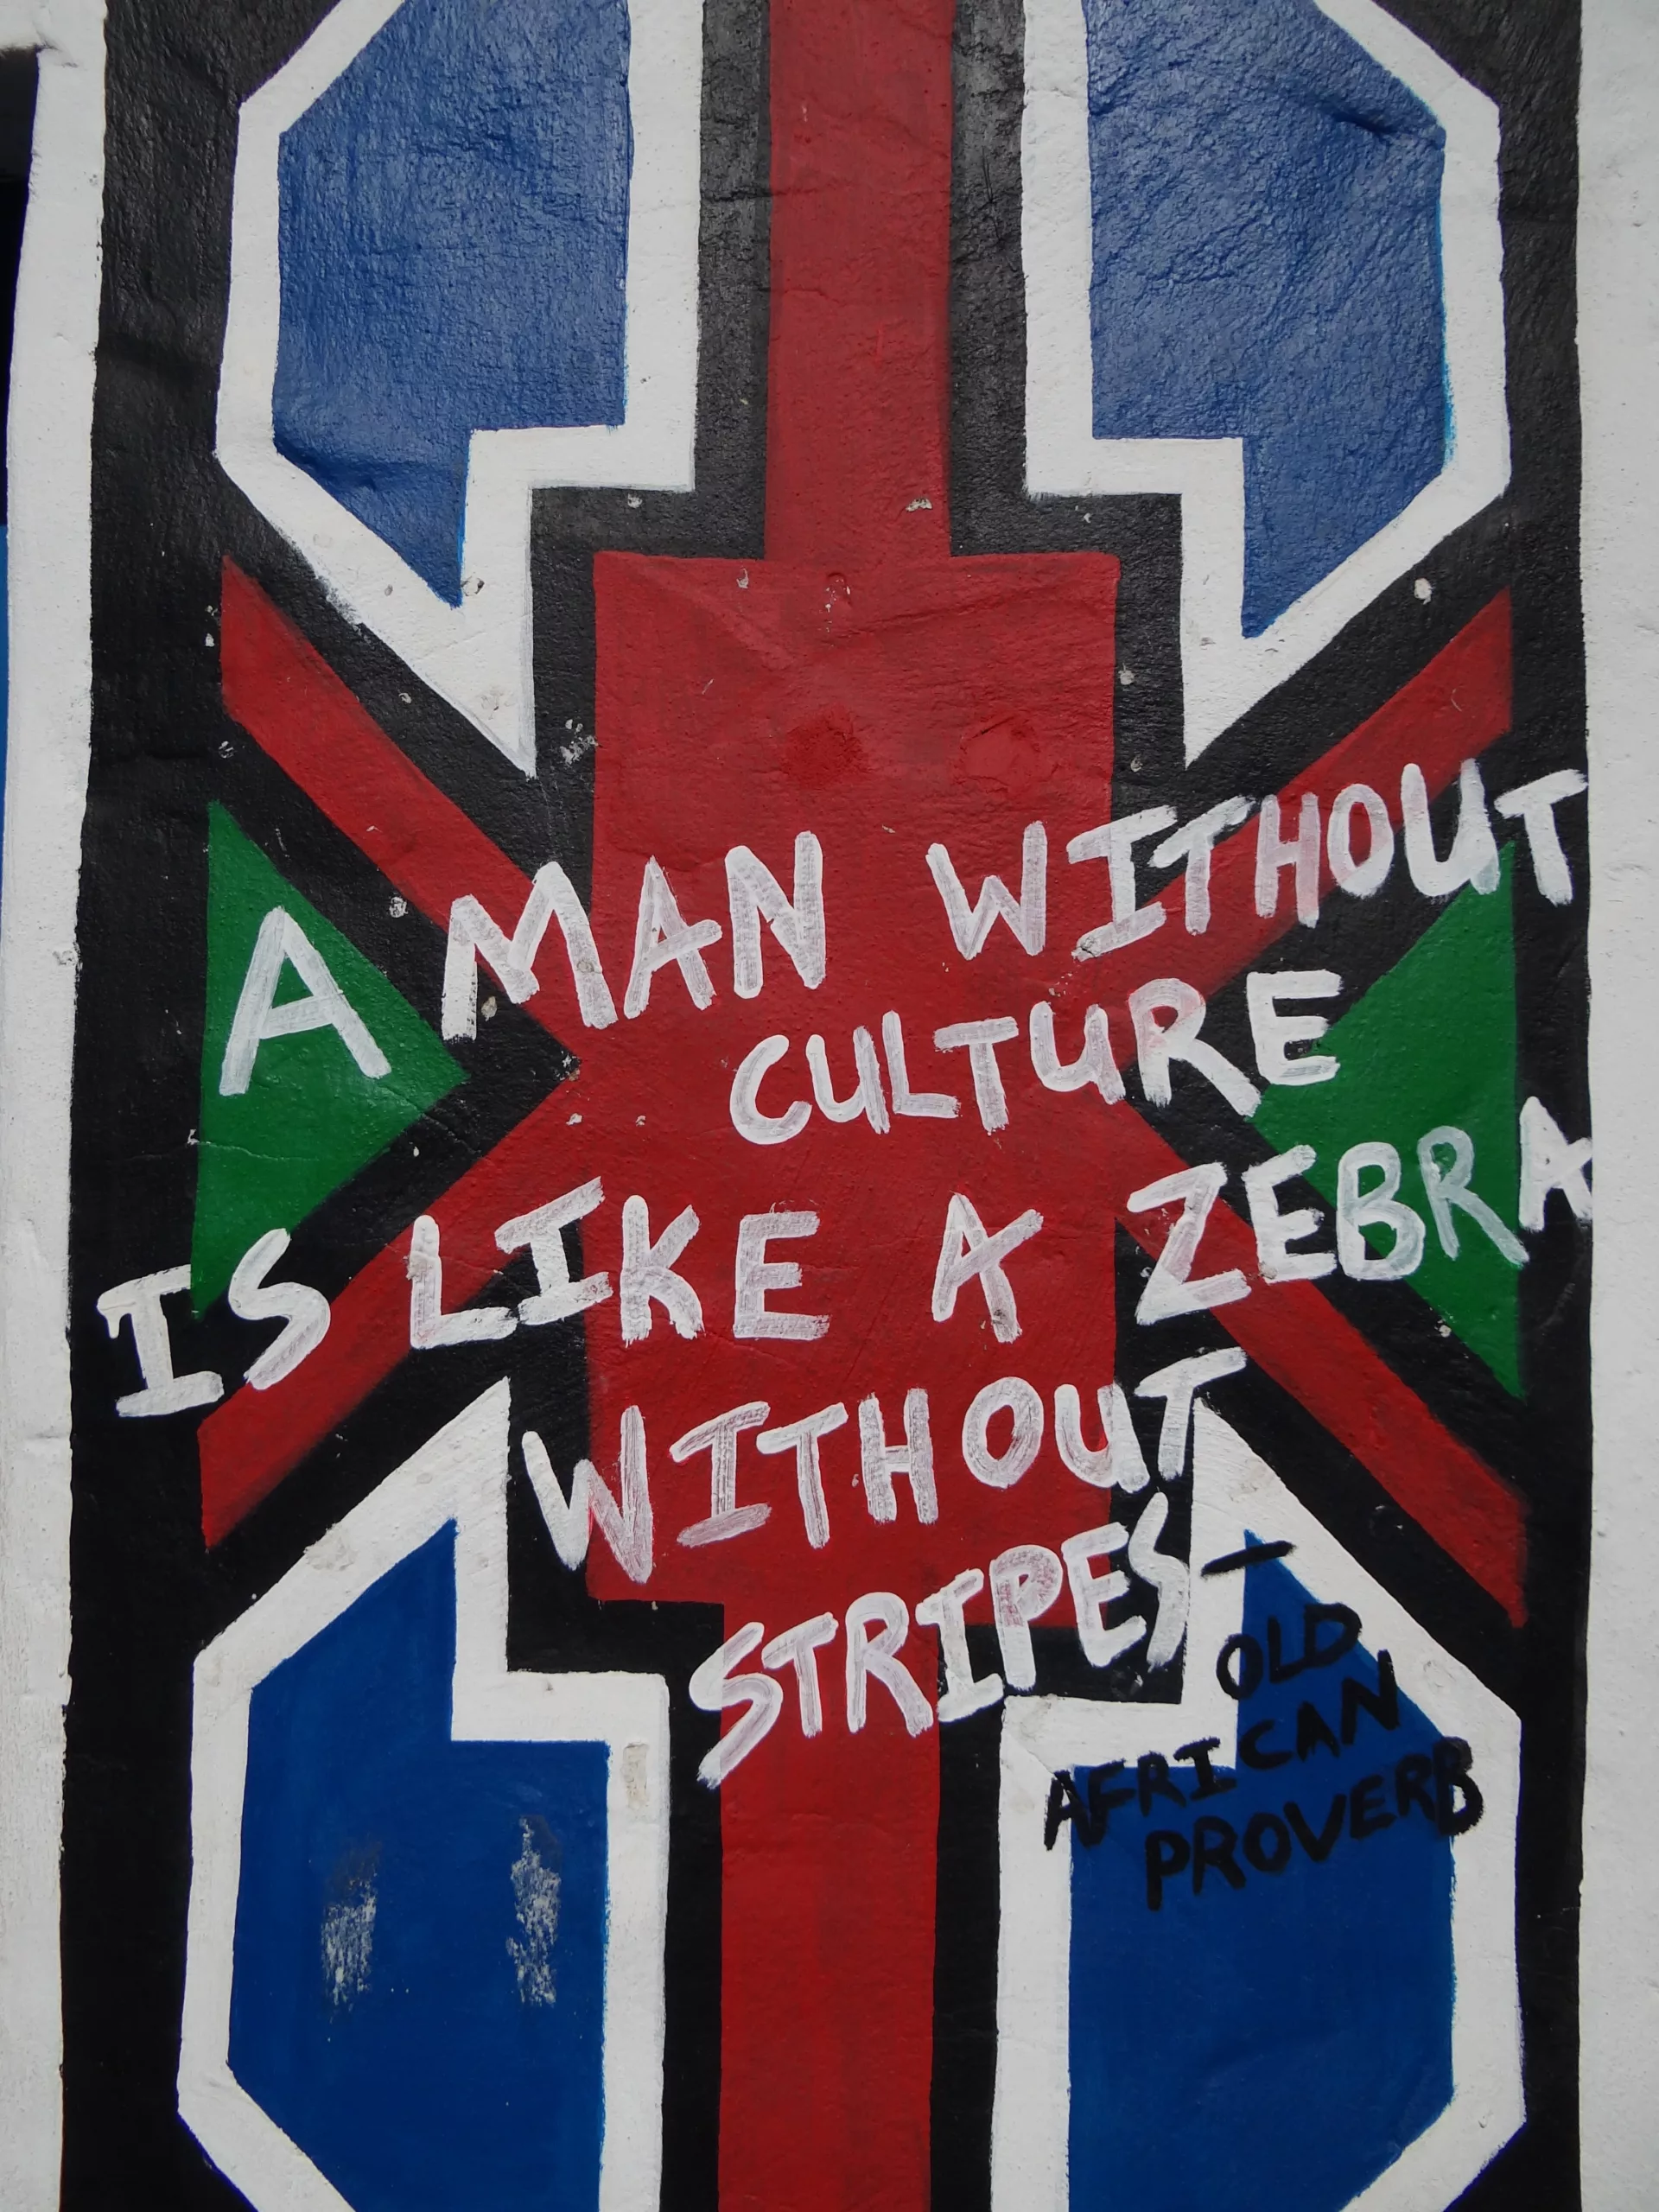 A man without culture is like a zebra without stripes